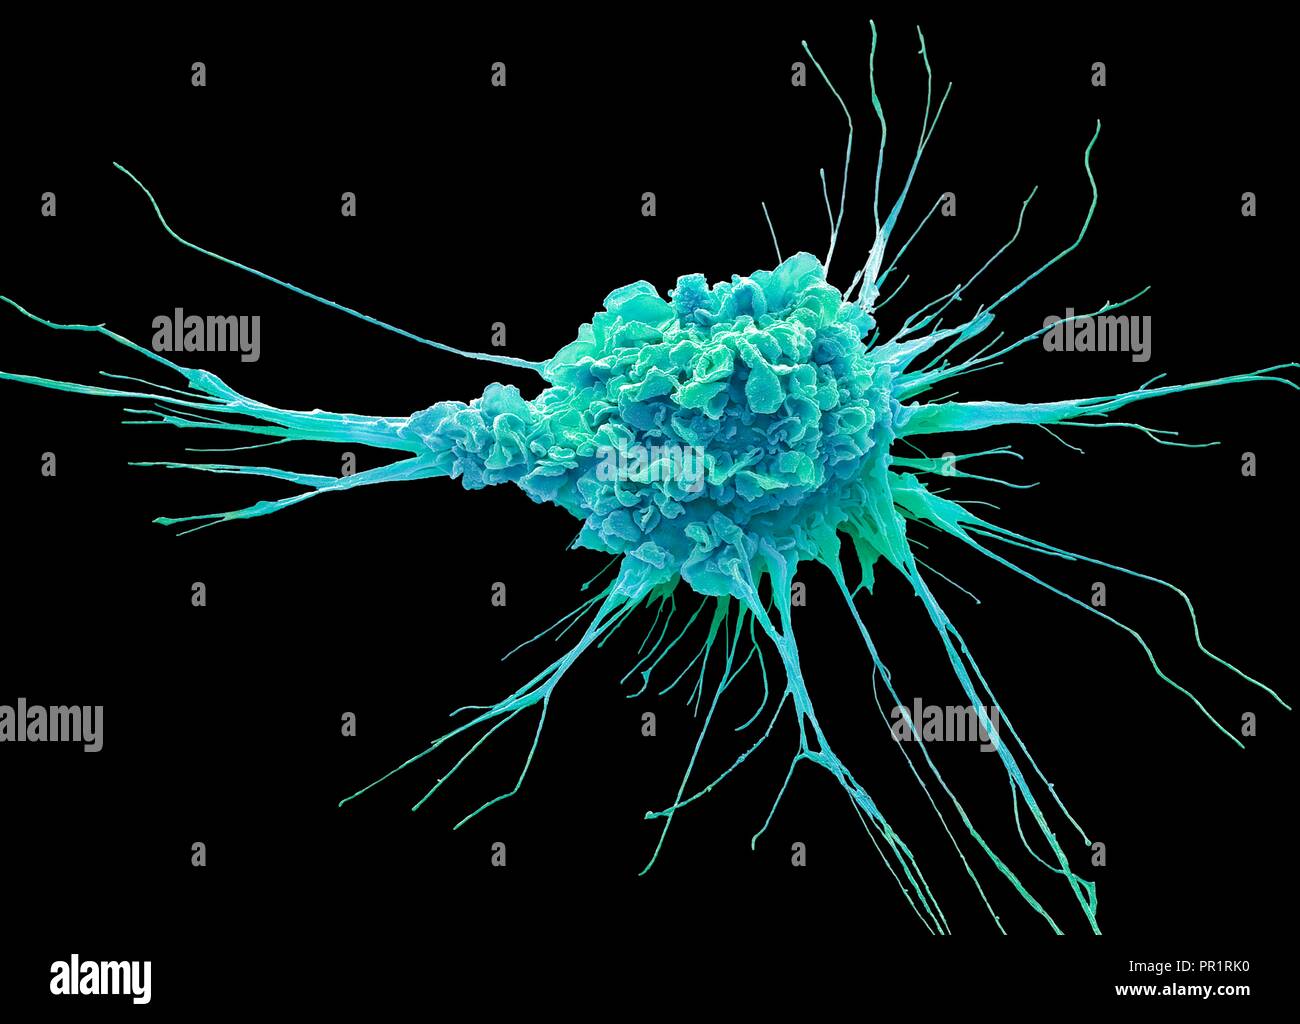 Dendritic cell. Coloured scanning electron micrograph (SEM) of a protective cell of the human immune system known as a dendritic cell. The long projections seen on the cell's surface are 'feet' to help it move. These cells process foreign antigens which then act like an alarm signal, alerting other immune cells of the body to the infection. Dendritic cells found in the upper layer of the skin (the epidermis) are known as histiocytes or Langerhans cells. In the central nervous system they are known as microglia, and in the liver as Kupffer cells. Magnification: x3000 when printed at 10cm wide. Stock Photo